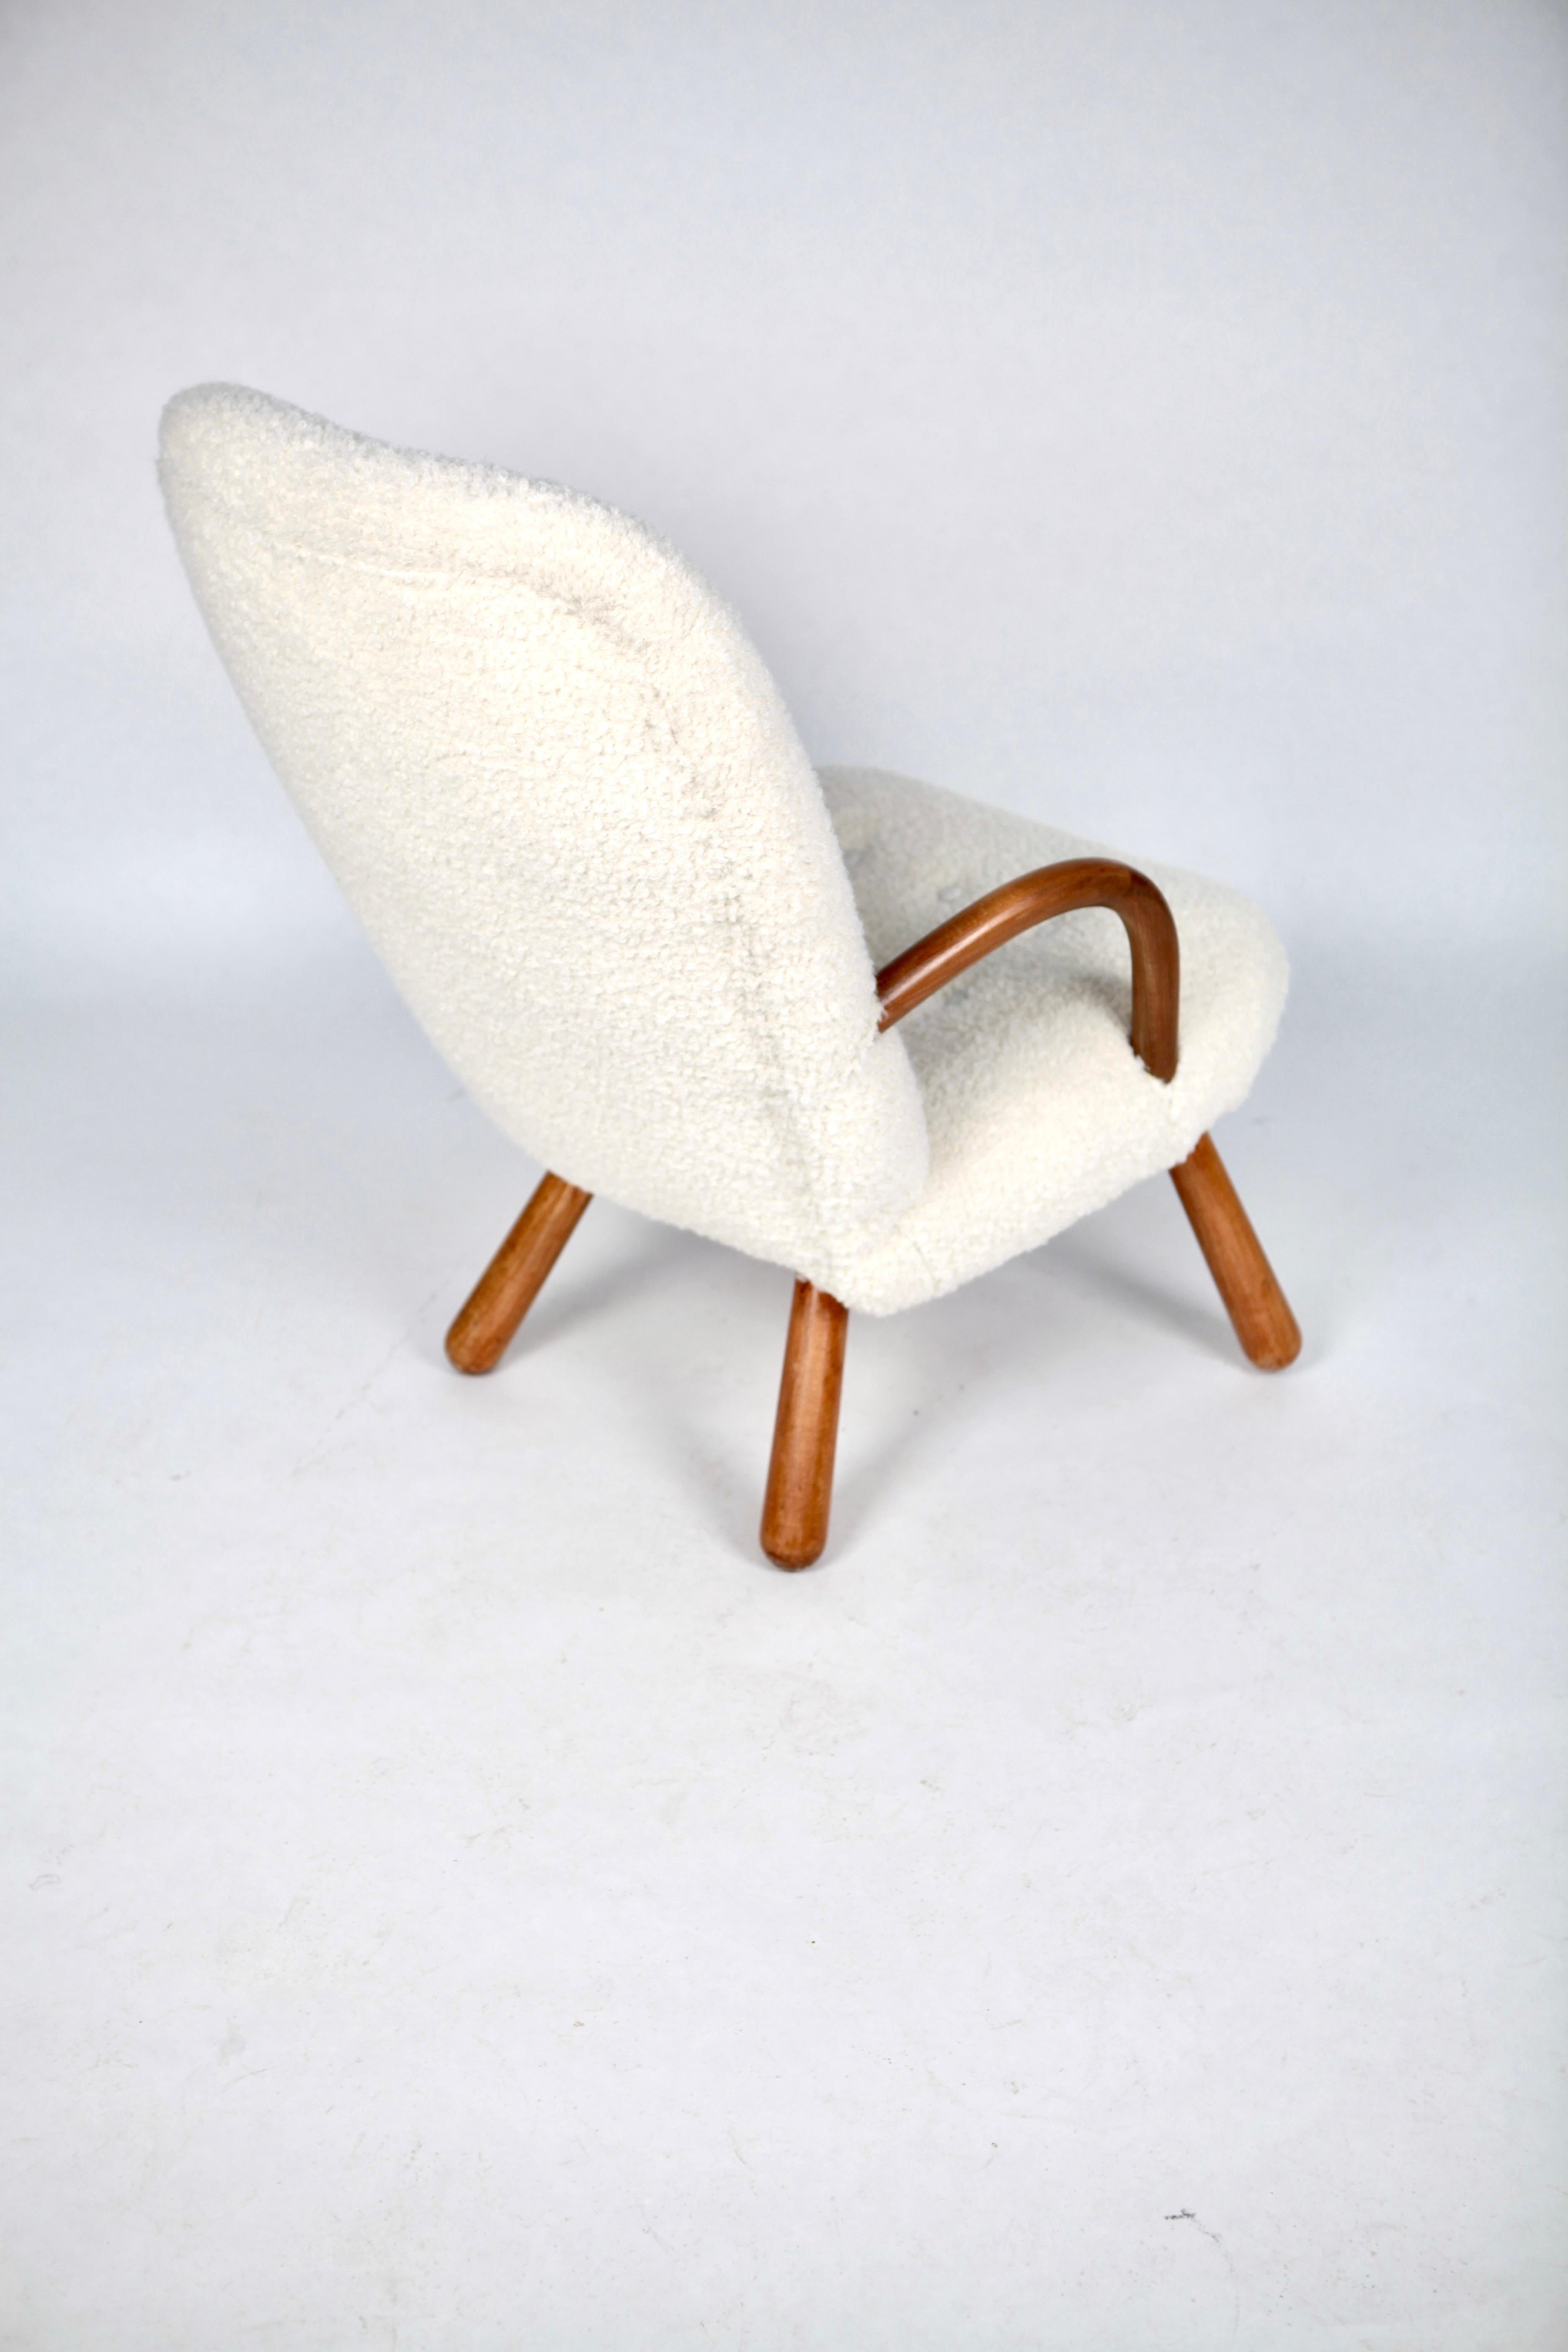 'Clam' Chair by Arnold Madsen for Madsen & Schubell, Denmark, 1944 6